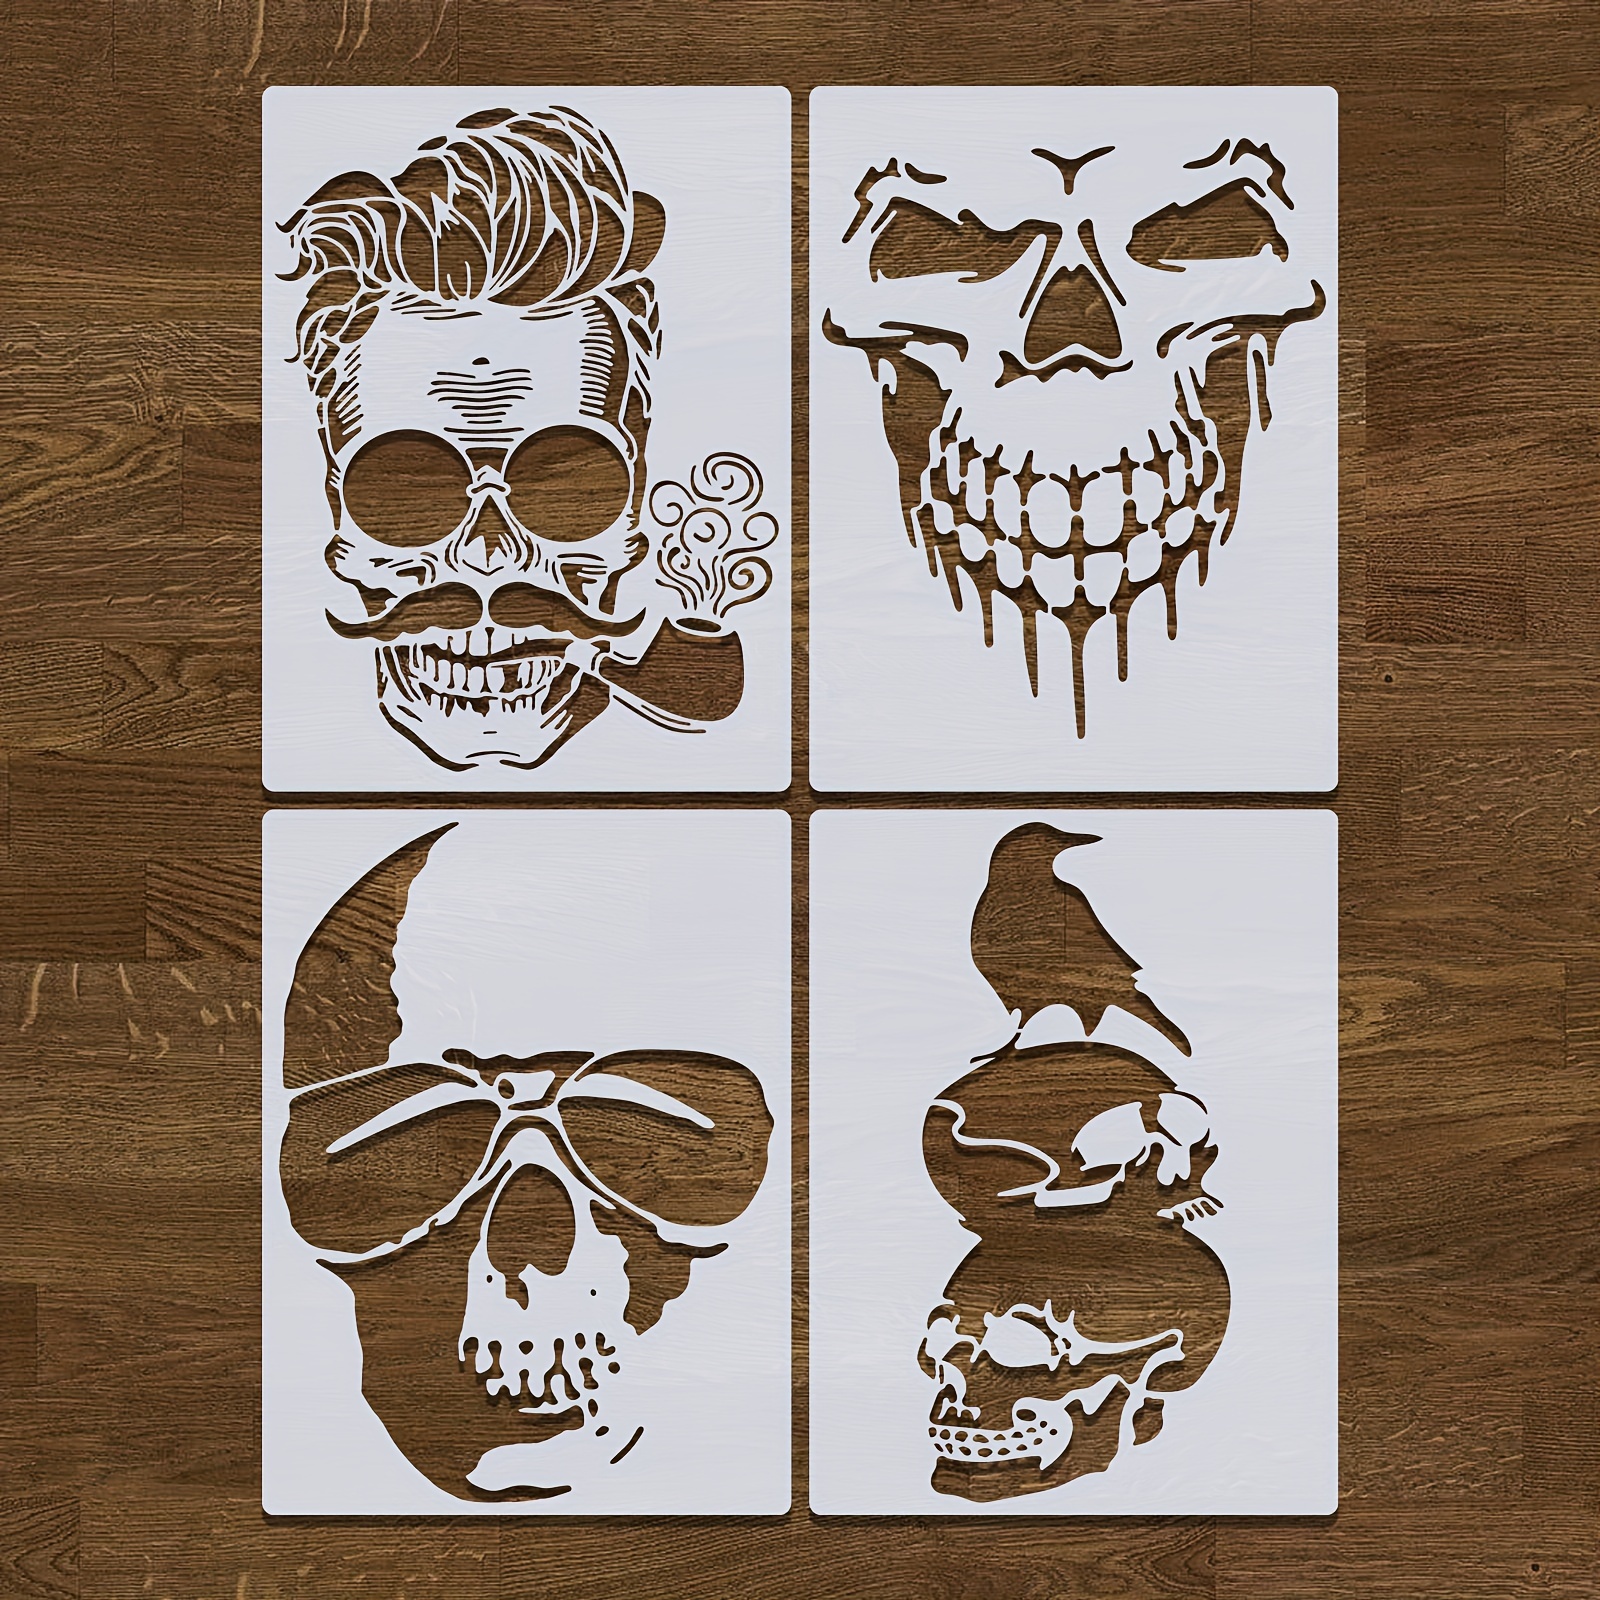 Airbrush Skull Fire Flame Stencil Set (Skull Design #1 in 3 Scale Sizes) -  Laser Cut Reusable Templates - Auto 